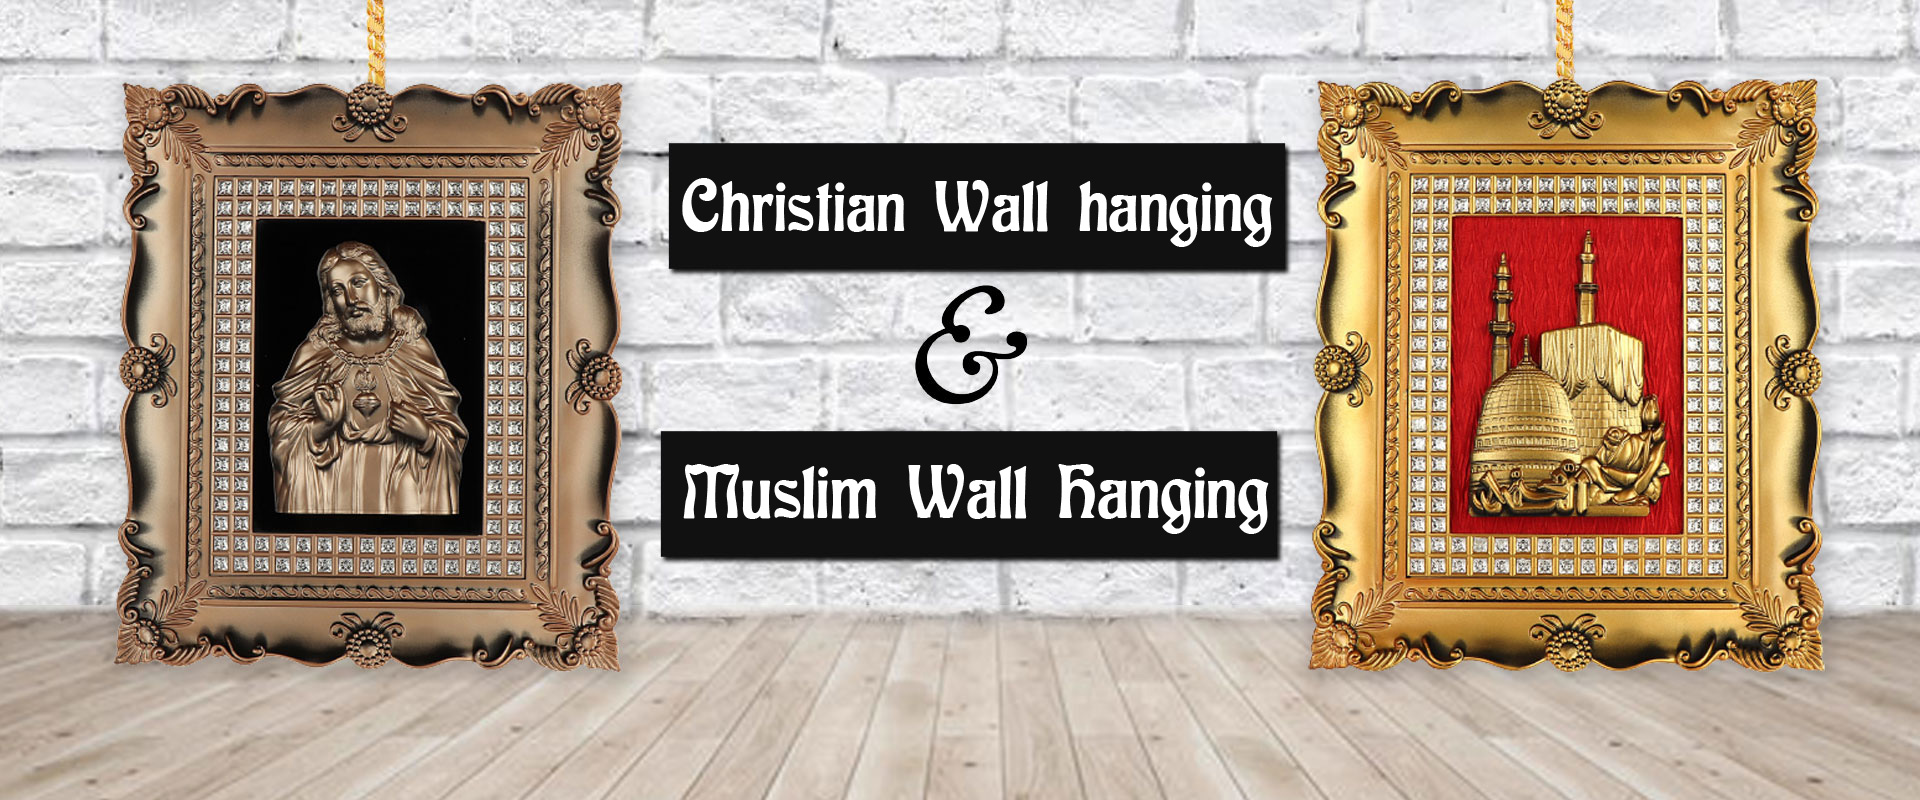 Christian and Muslim Wall Hanging In India